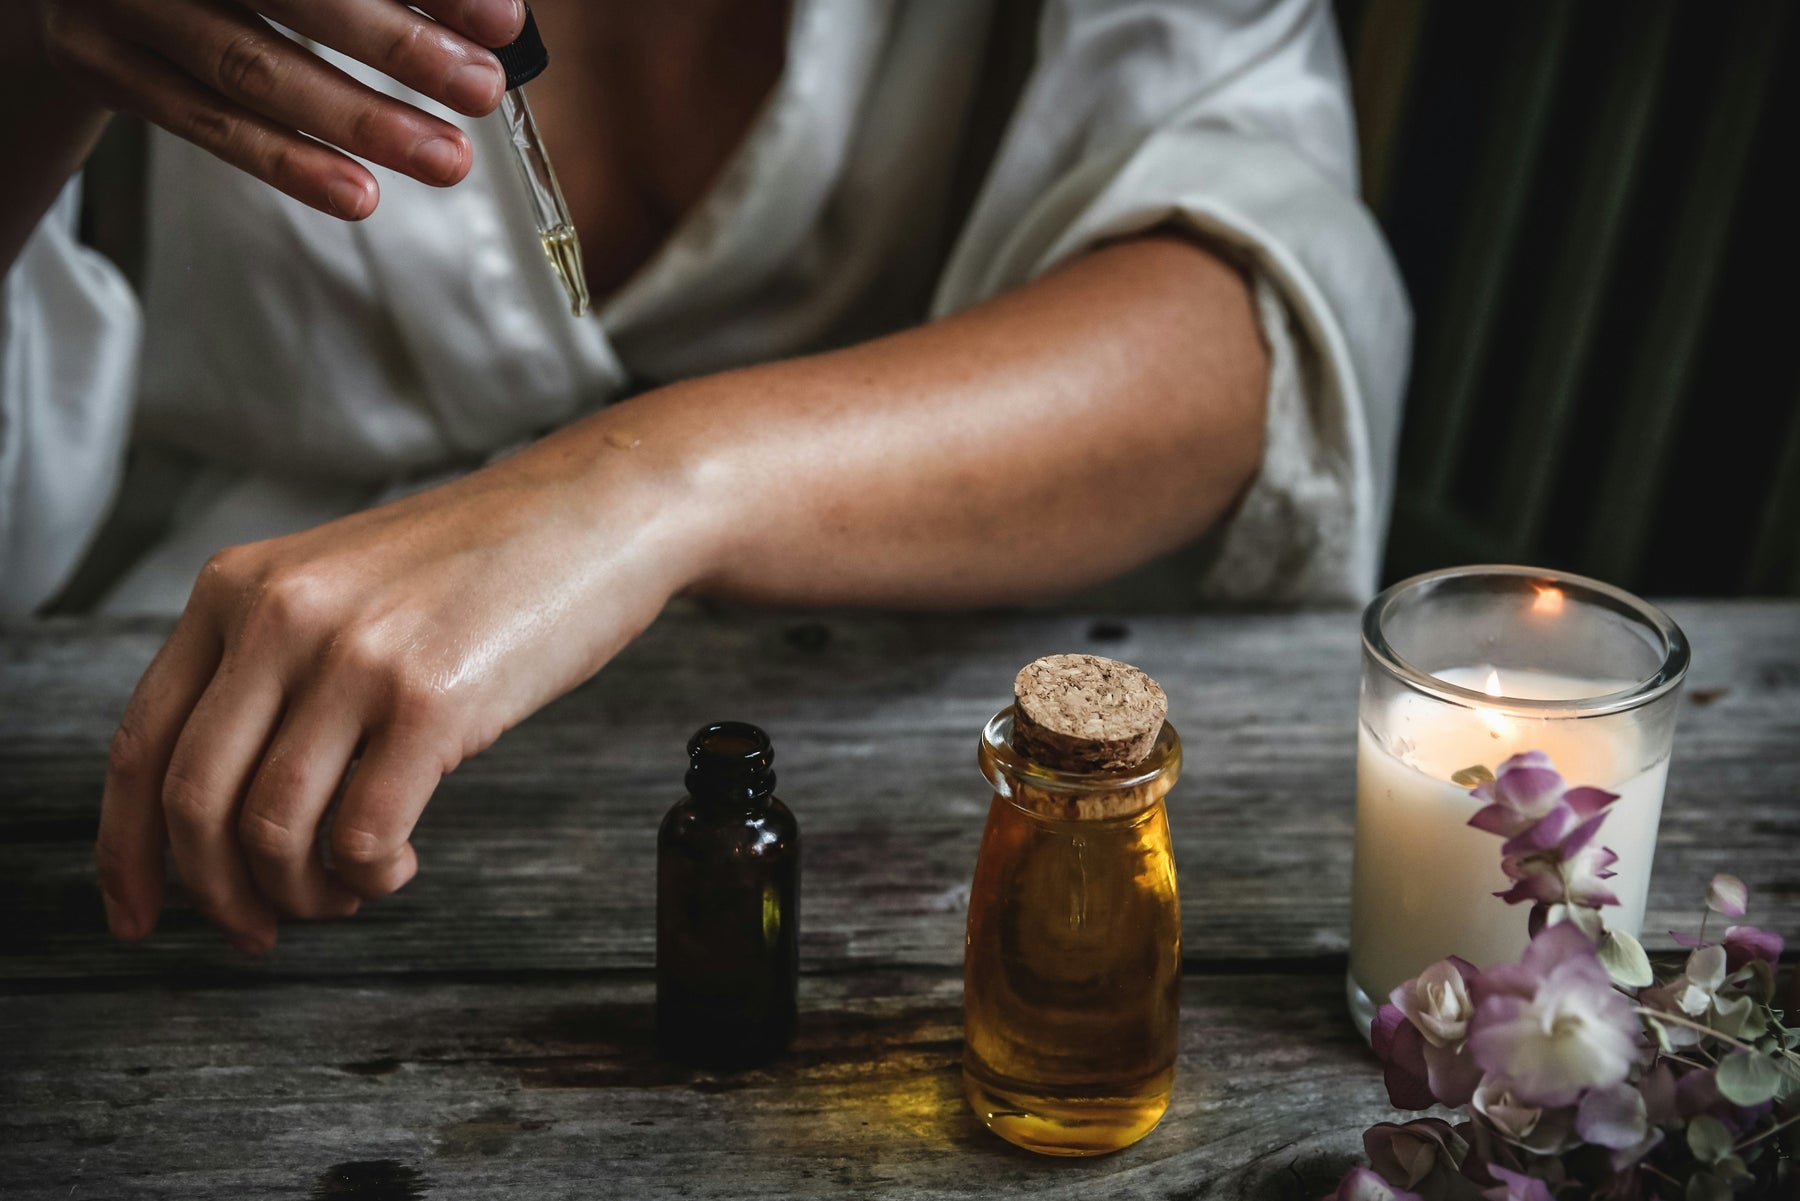 THE BENEFITS OF AROMATHERAPY AT HOME